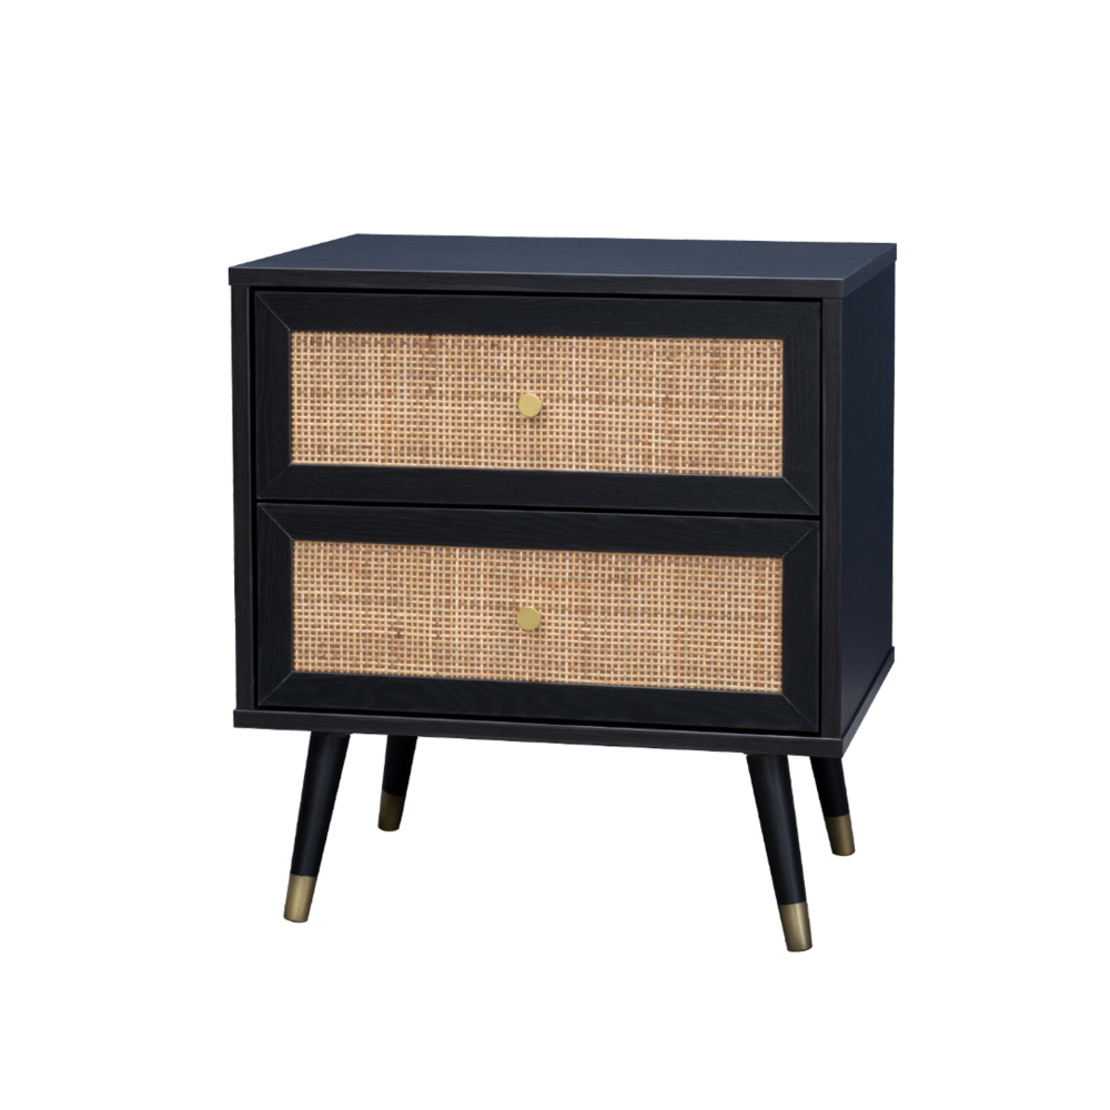 VIENNA NIGHTSTAND CHIPBOARD WITH MELAMINE BLACK WITH RATTAN GOLD E1 PRC